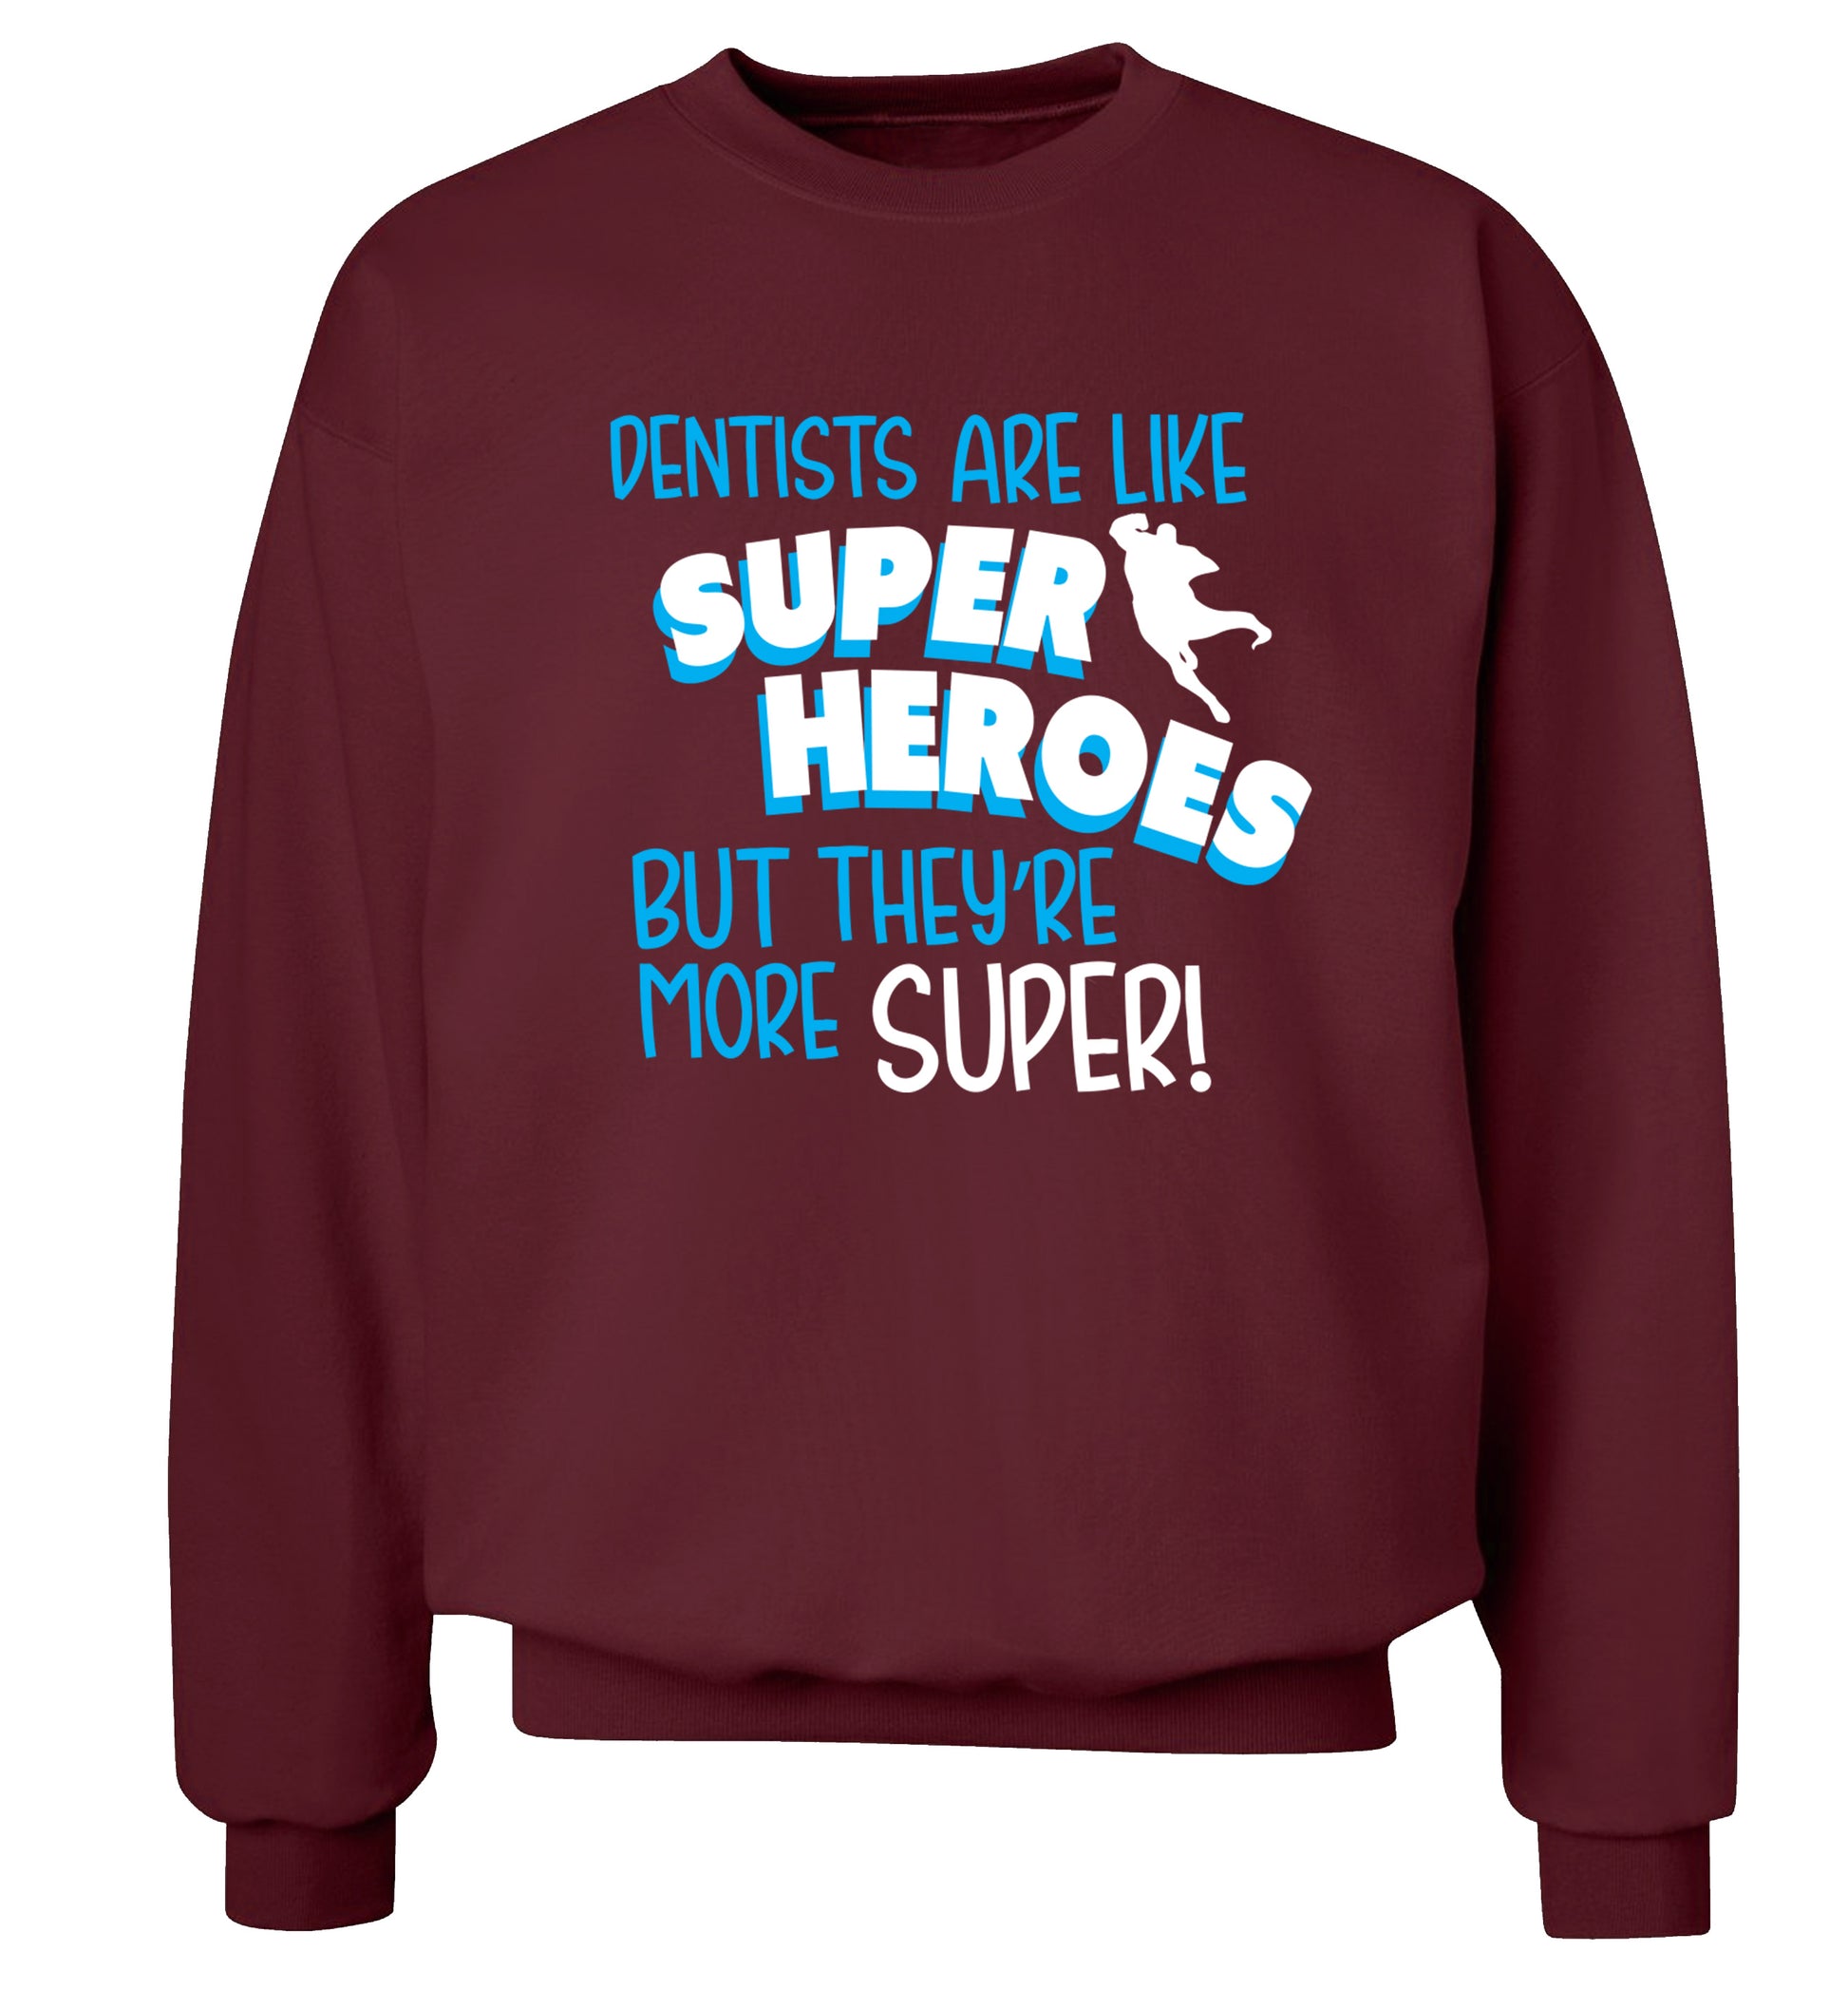 Dentists are like superheros but they're more super Adult's unisex maroon Sweater 2XL